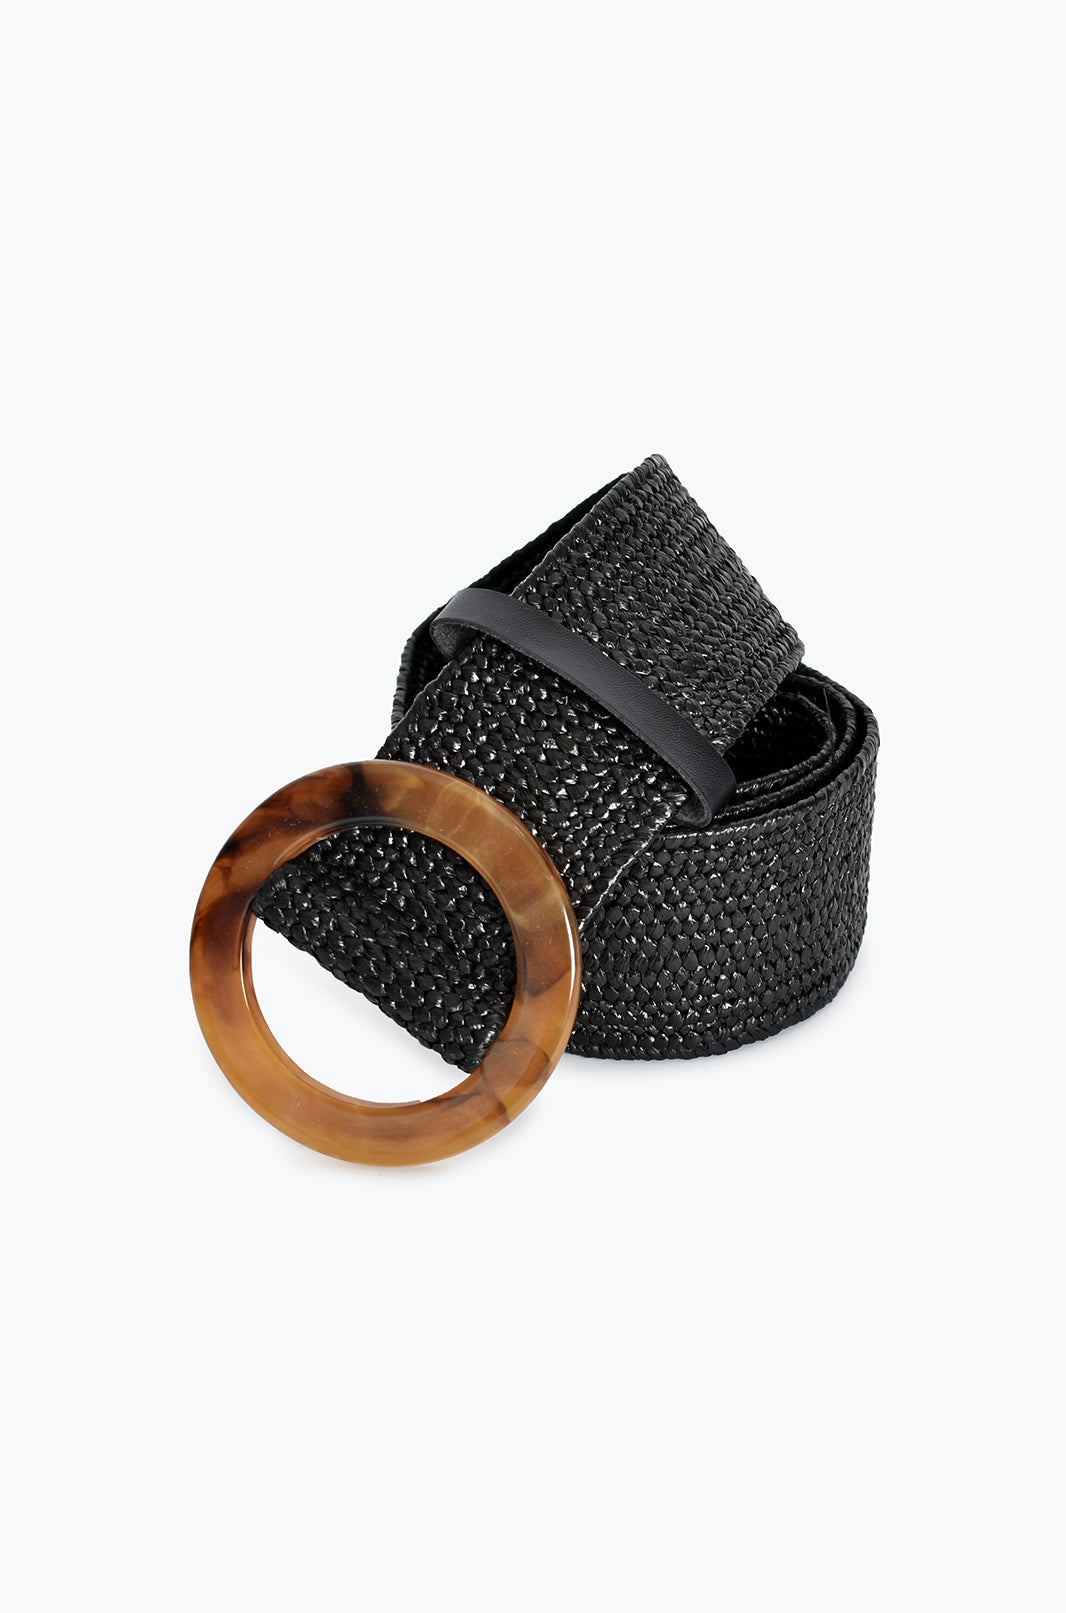 Woven stretch belt - black and tan